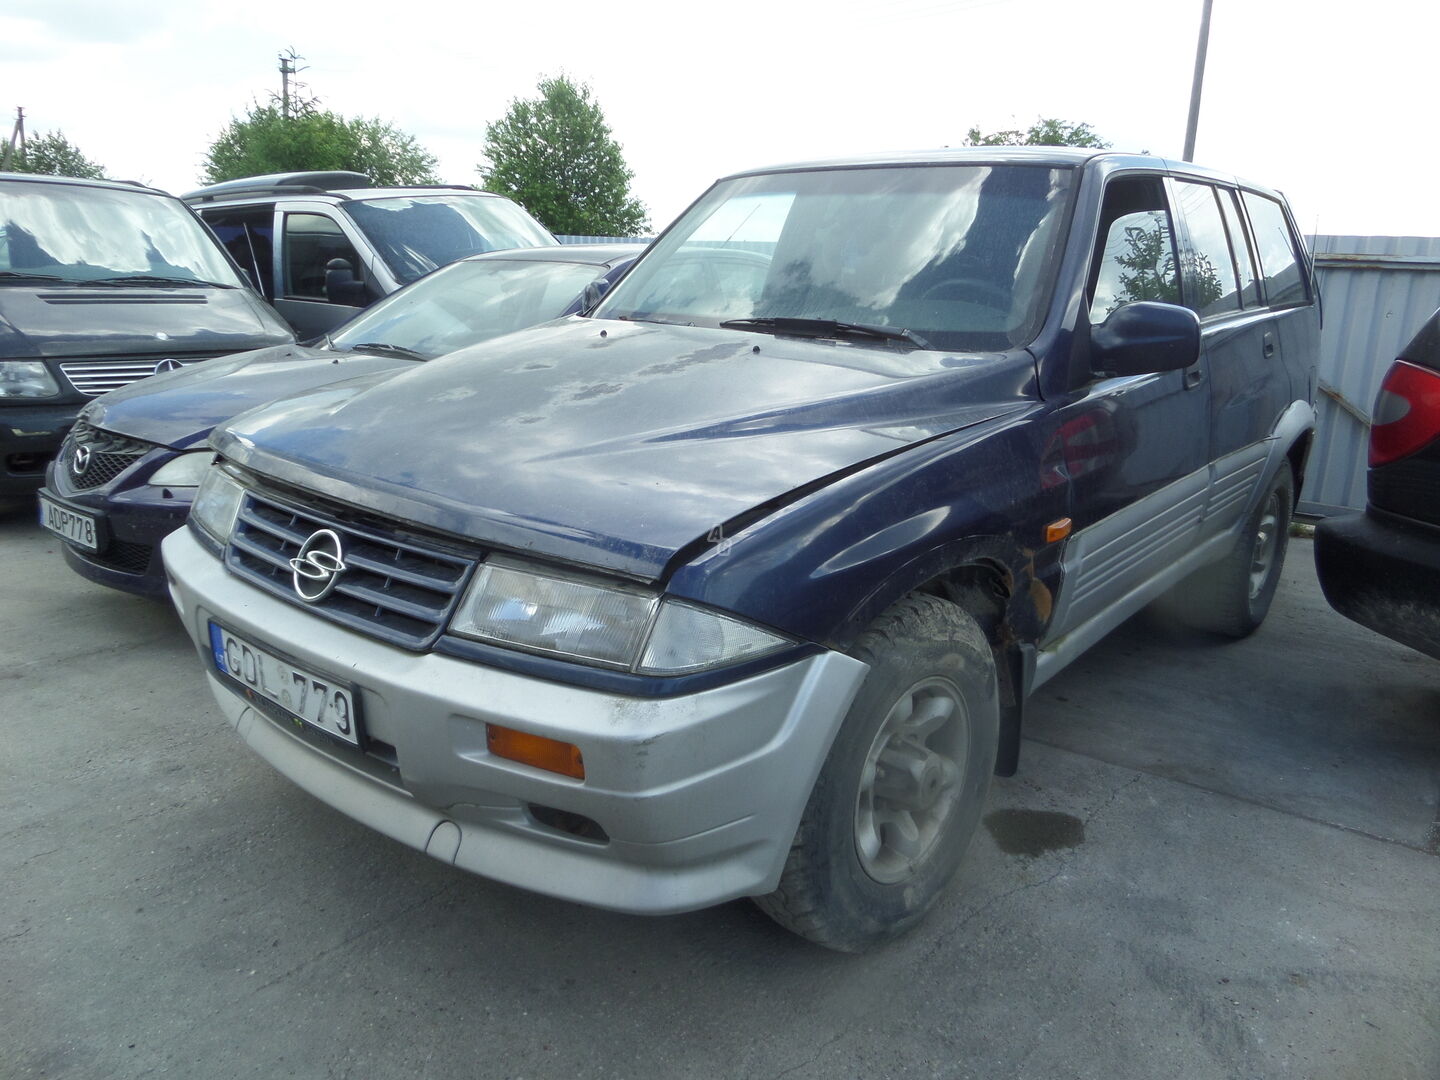 Ssangyong Musso 1998 г запчясти